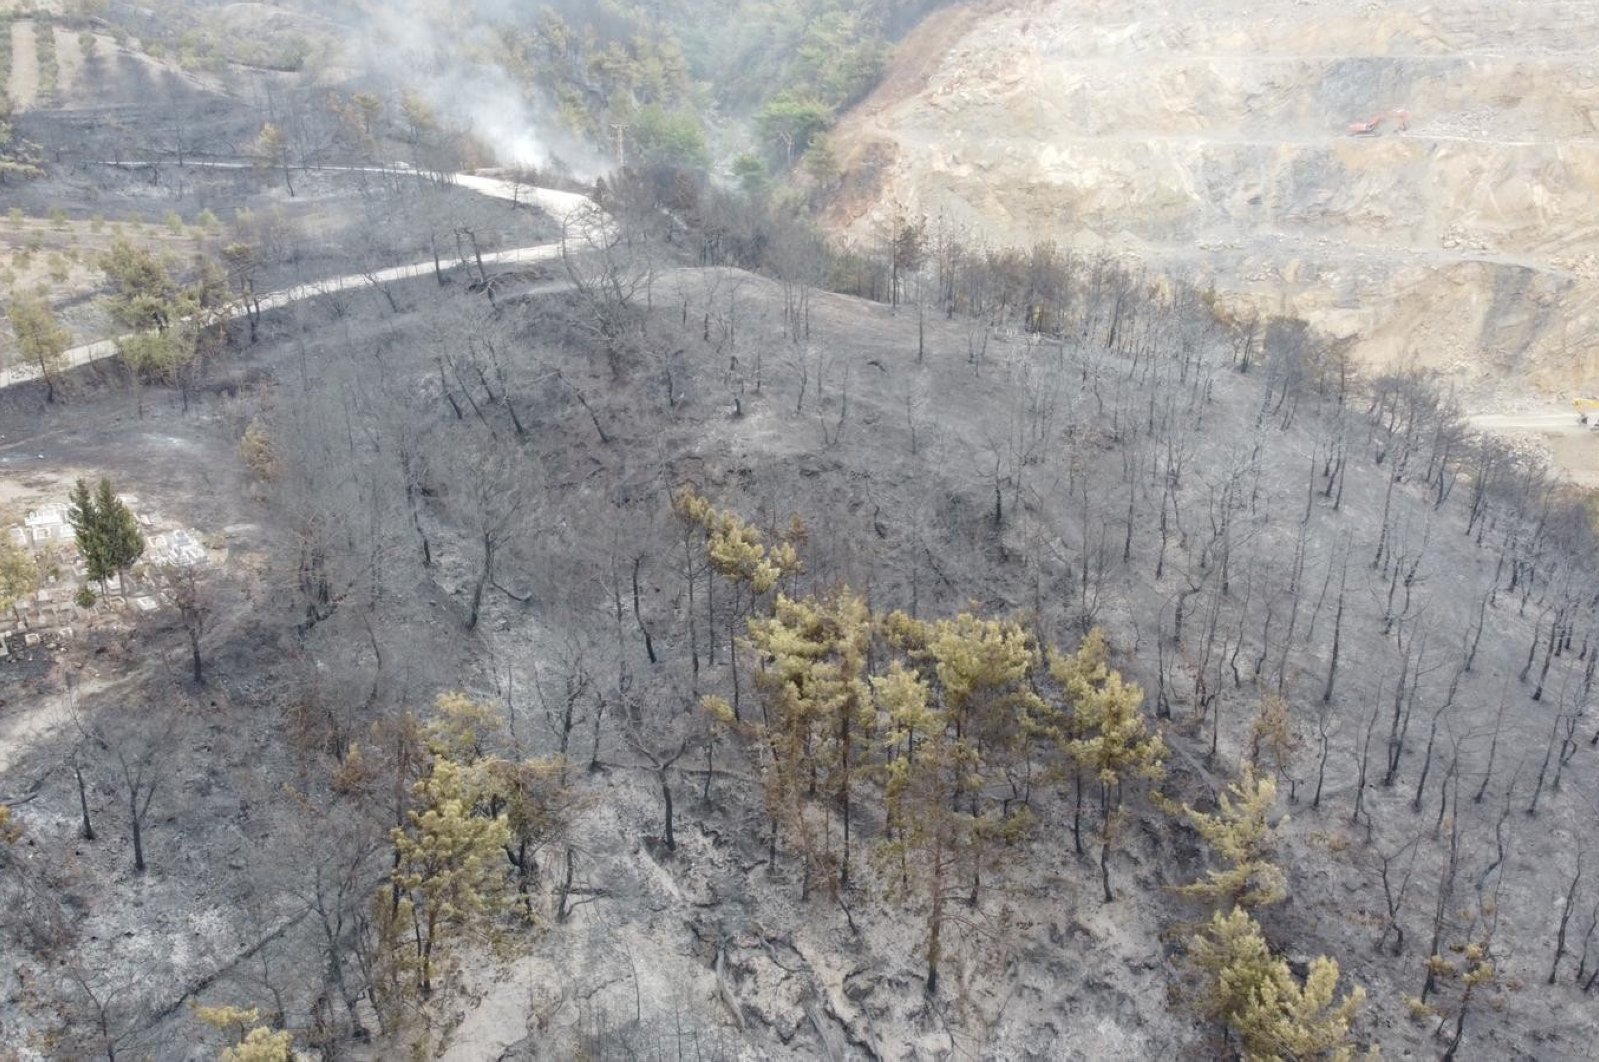 Forest fire in Turkey's Hatay province extinguished after